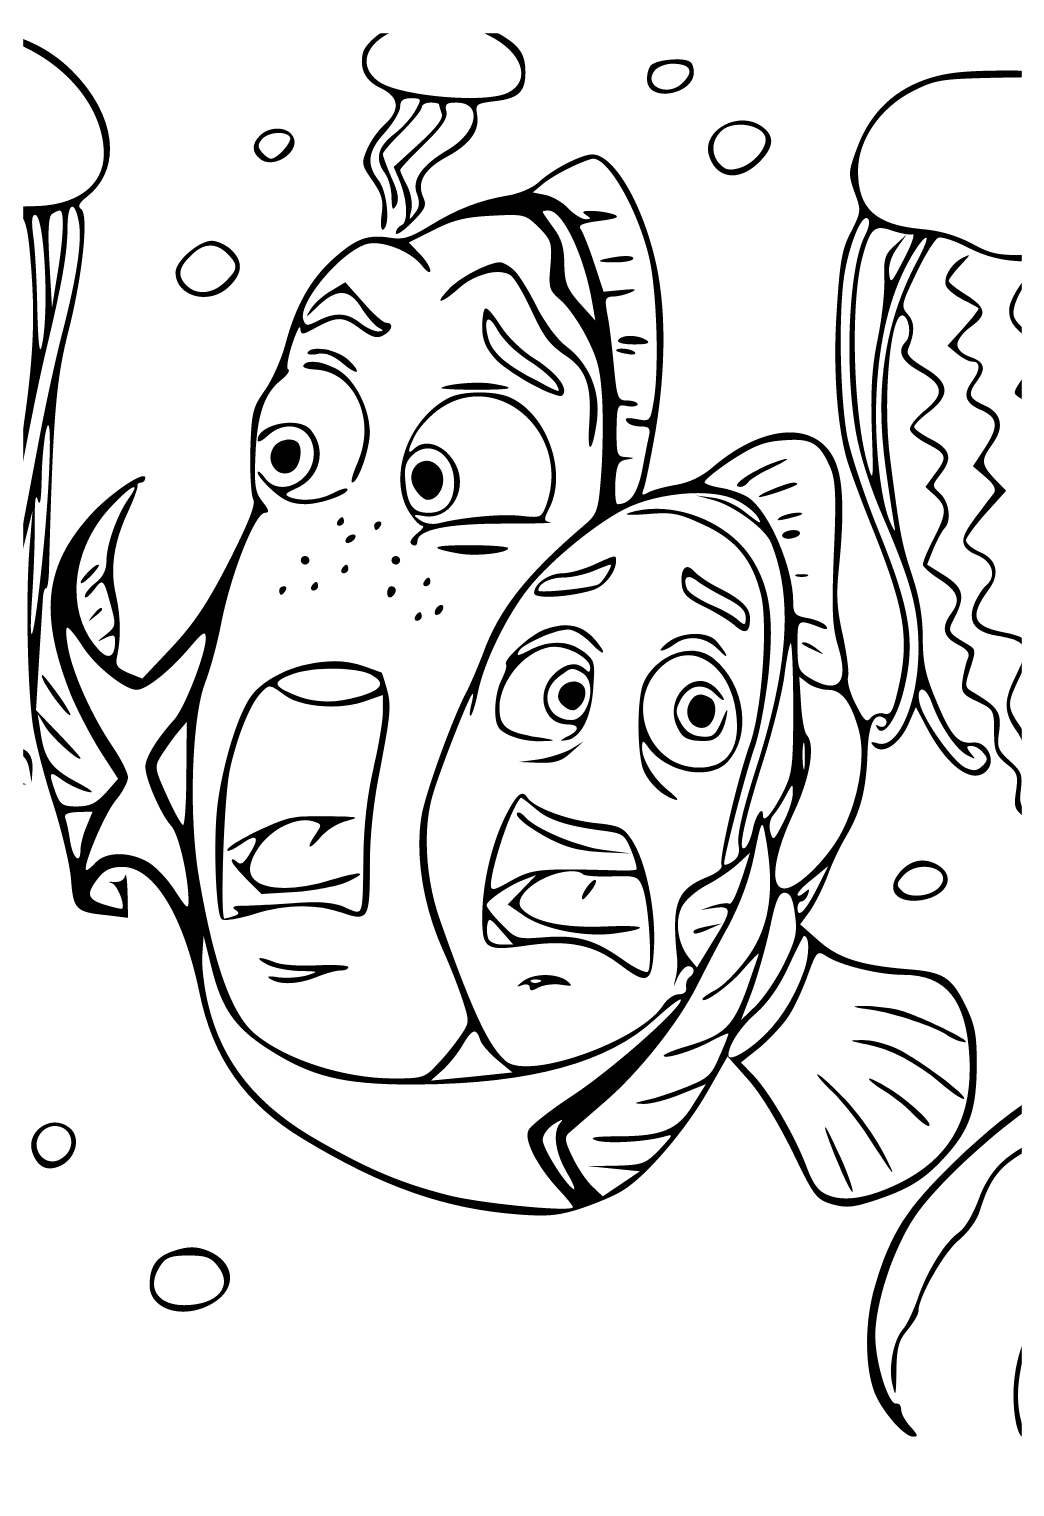 Free printable finding nemo danger coloring page for adults and kids